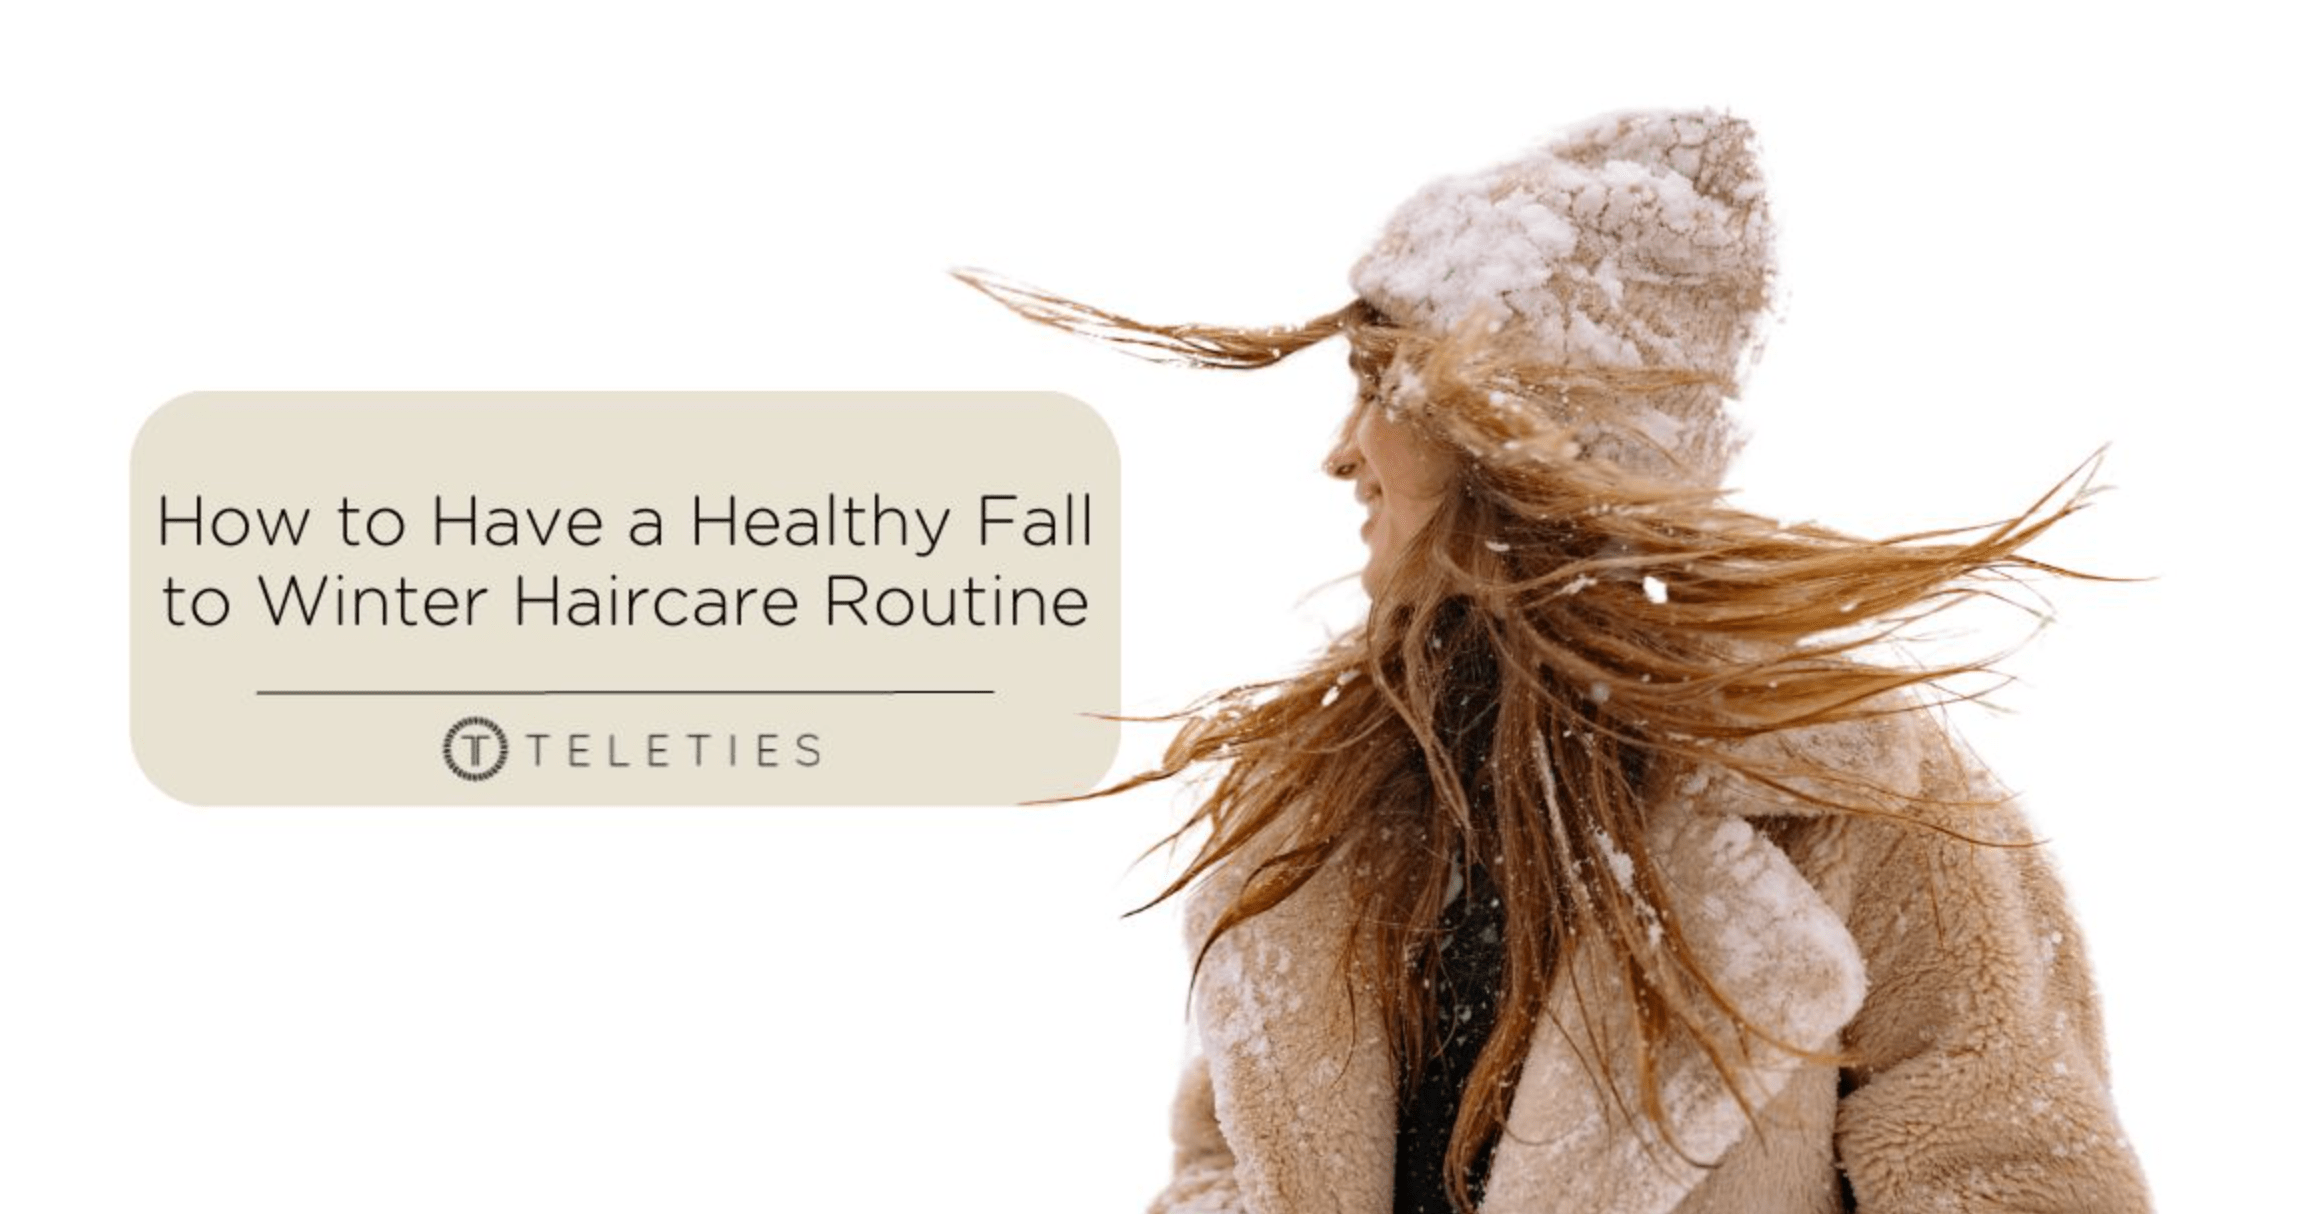 How to Have a Healthy Fall to Winter Hair Routine - TELETIES